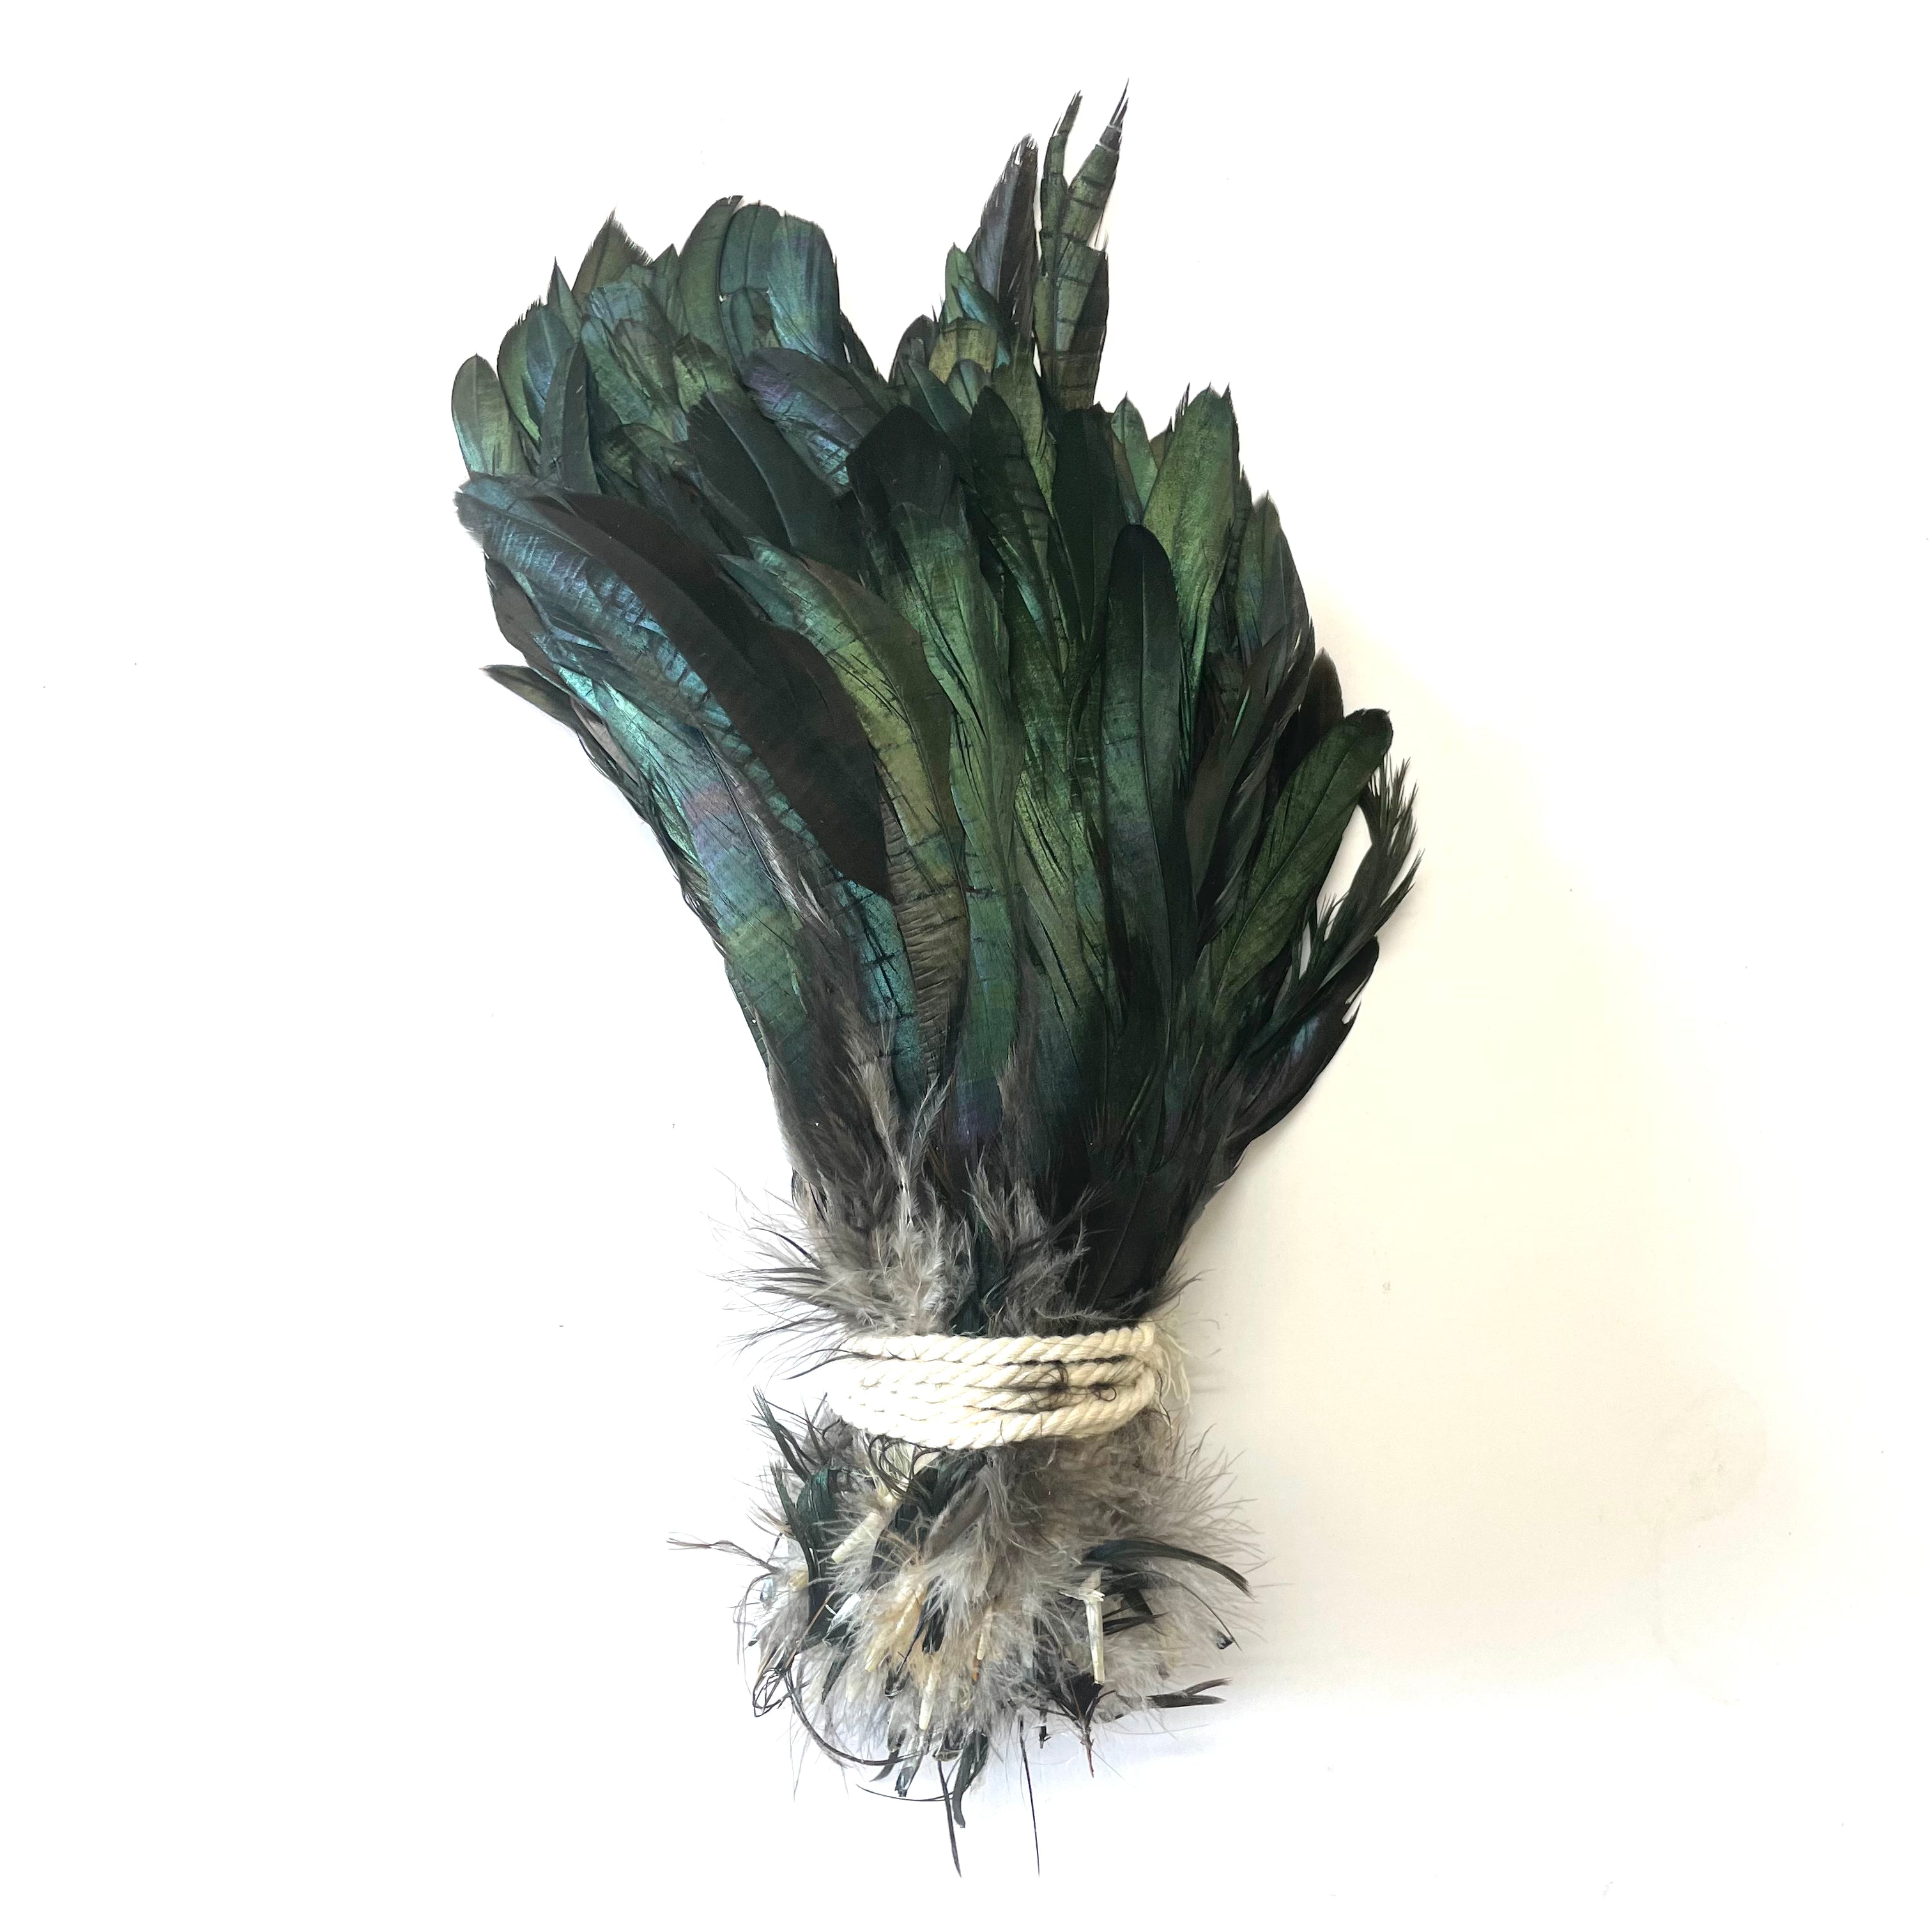 Coque Tail Feathers 8-10" 240mm - 10 grams - Natural Black